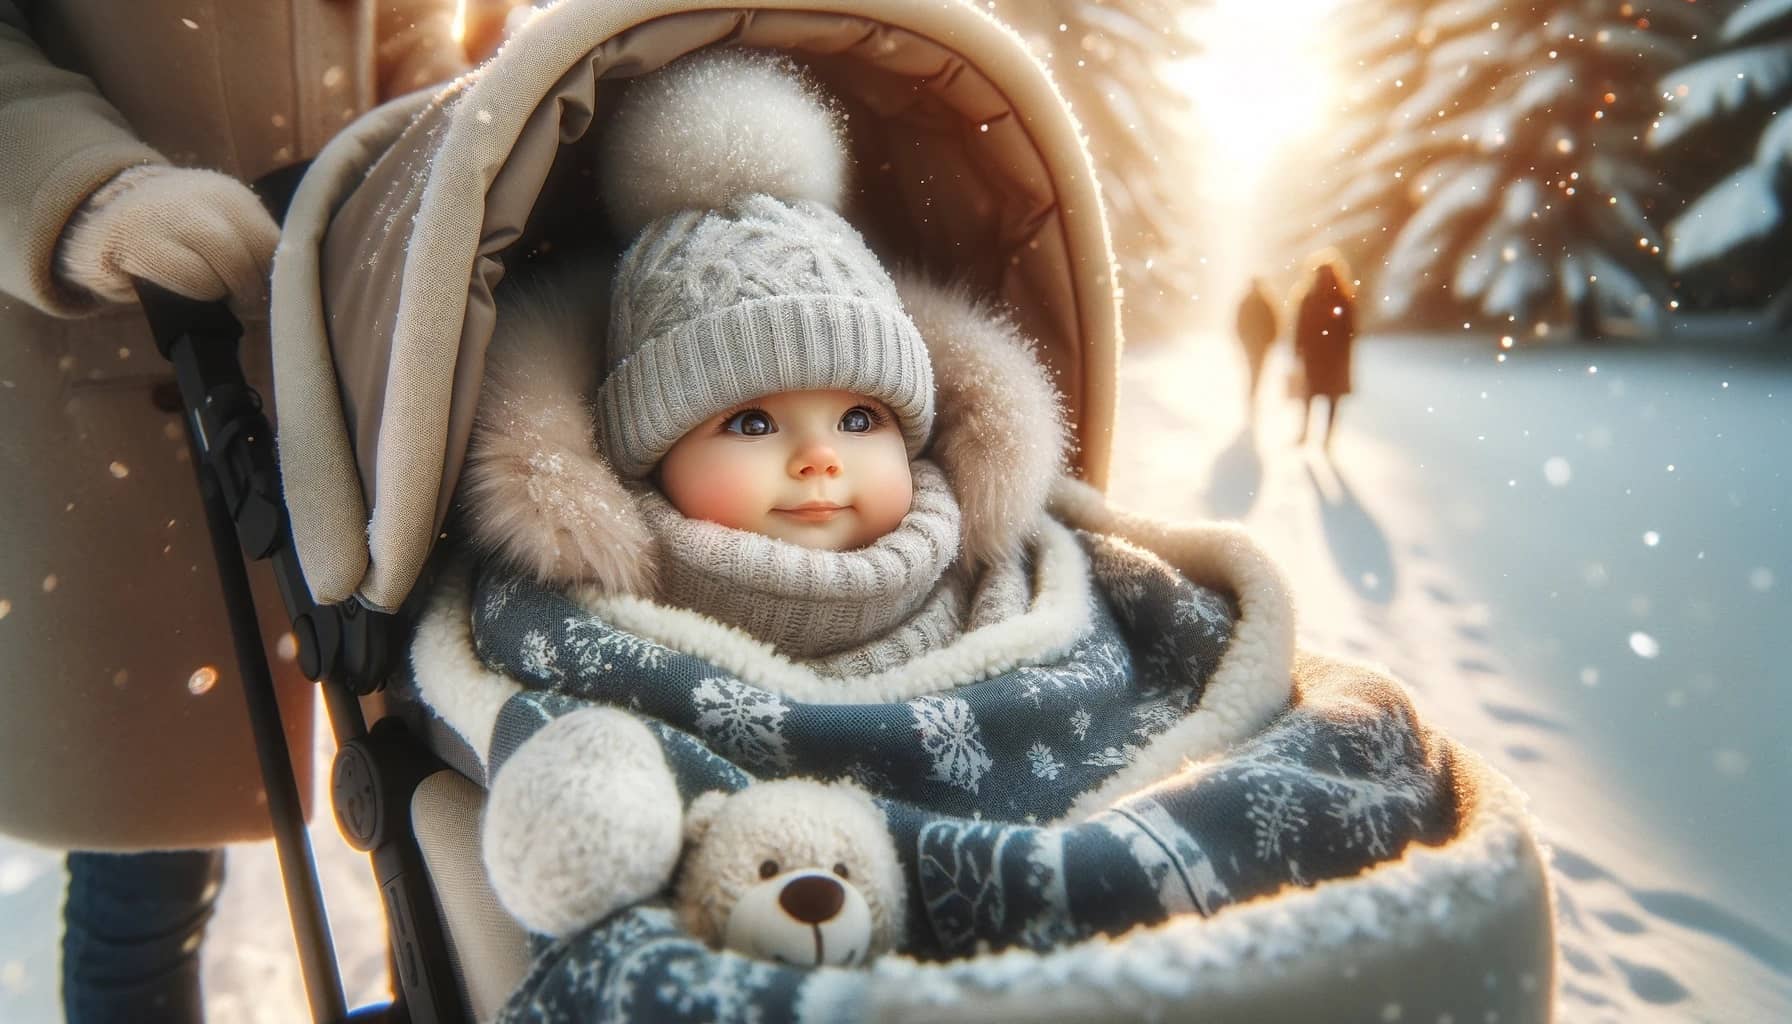 heartwarming winter scene, where a baby is snugly wrapped in a cozy stroller blanket, enjoying the soft winter light and the magic of falling snowflakes